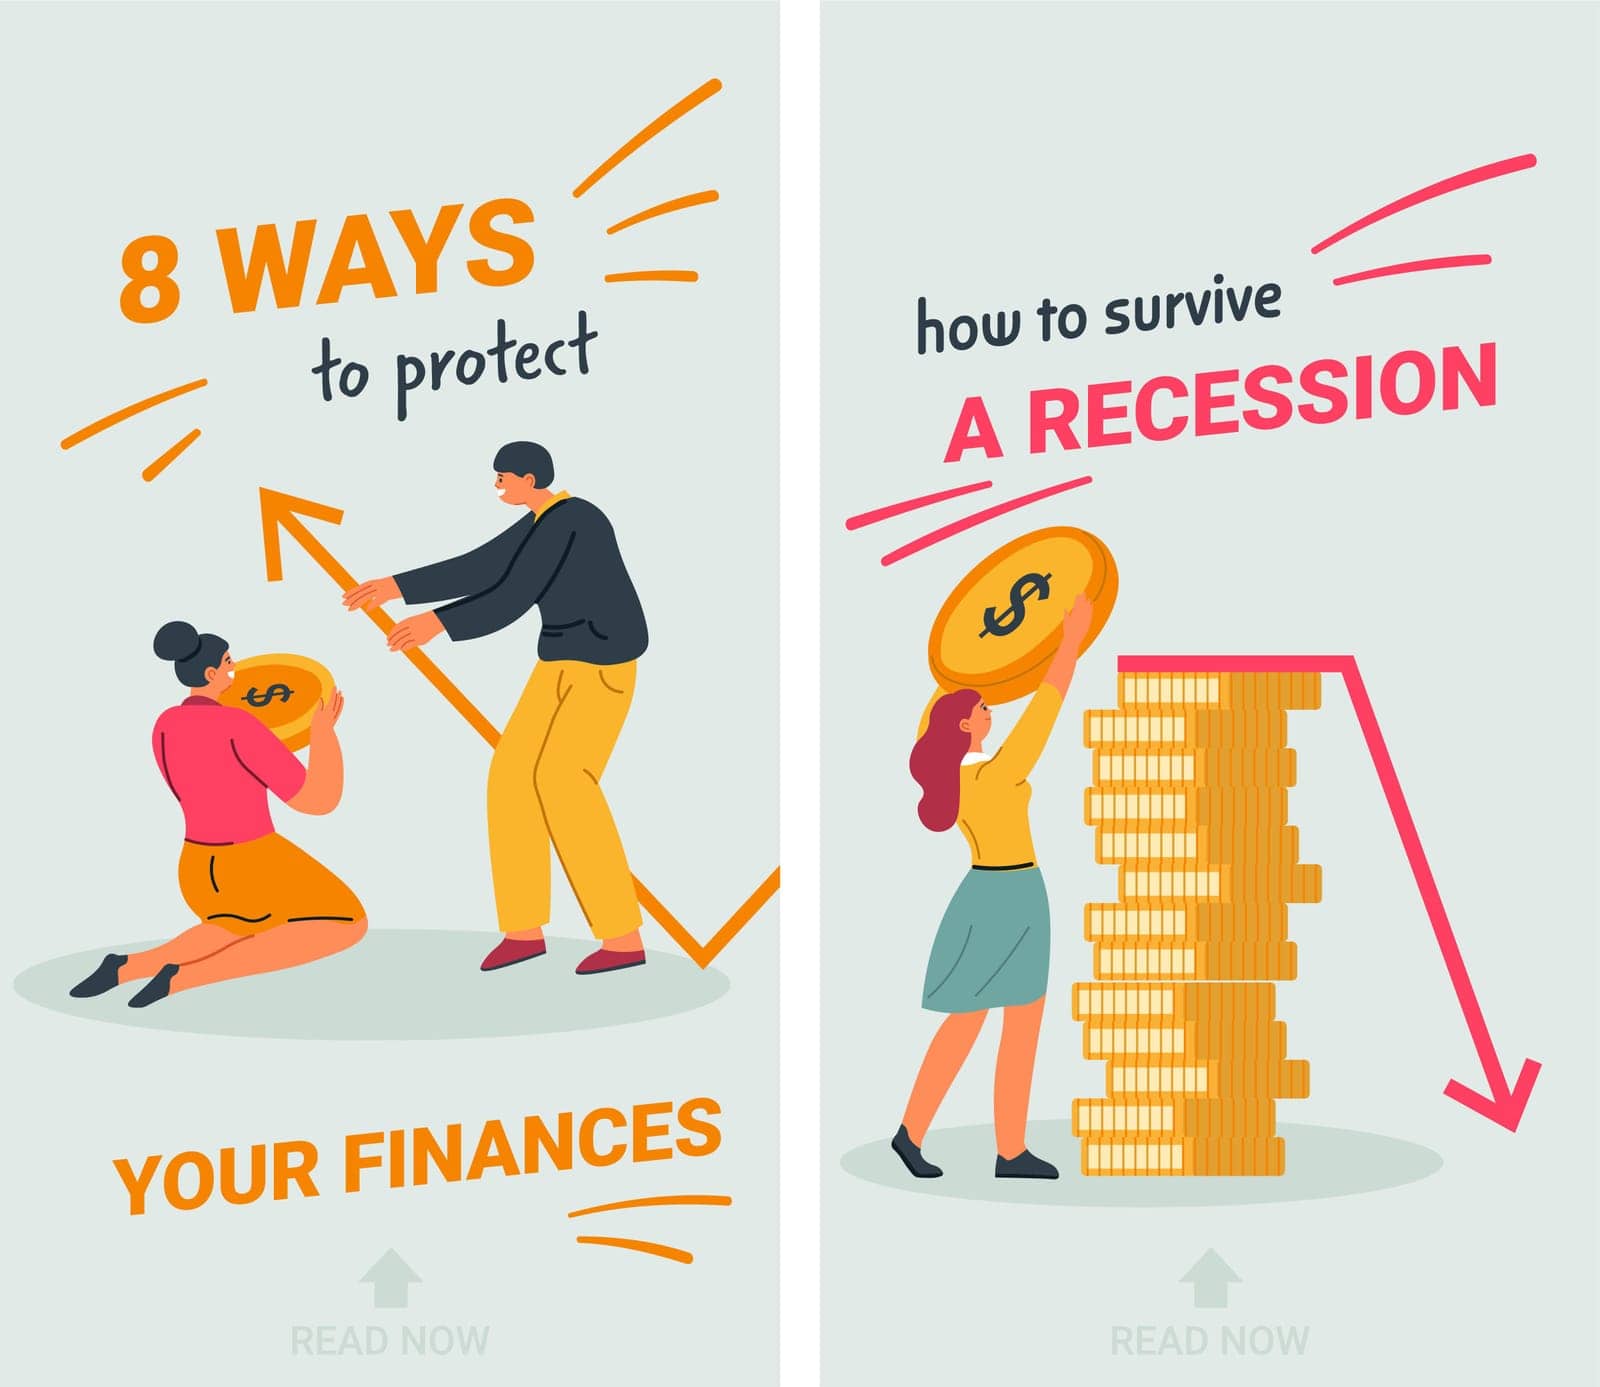 Budgeting recommendations and tips, how to survive recession, 8 ways to protect finances. Money saving and controlling, budget and care for assets, capitalization banners. Vector in flat style